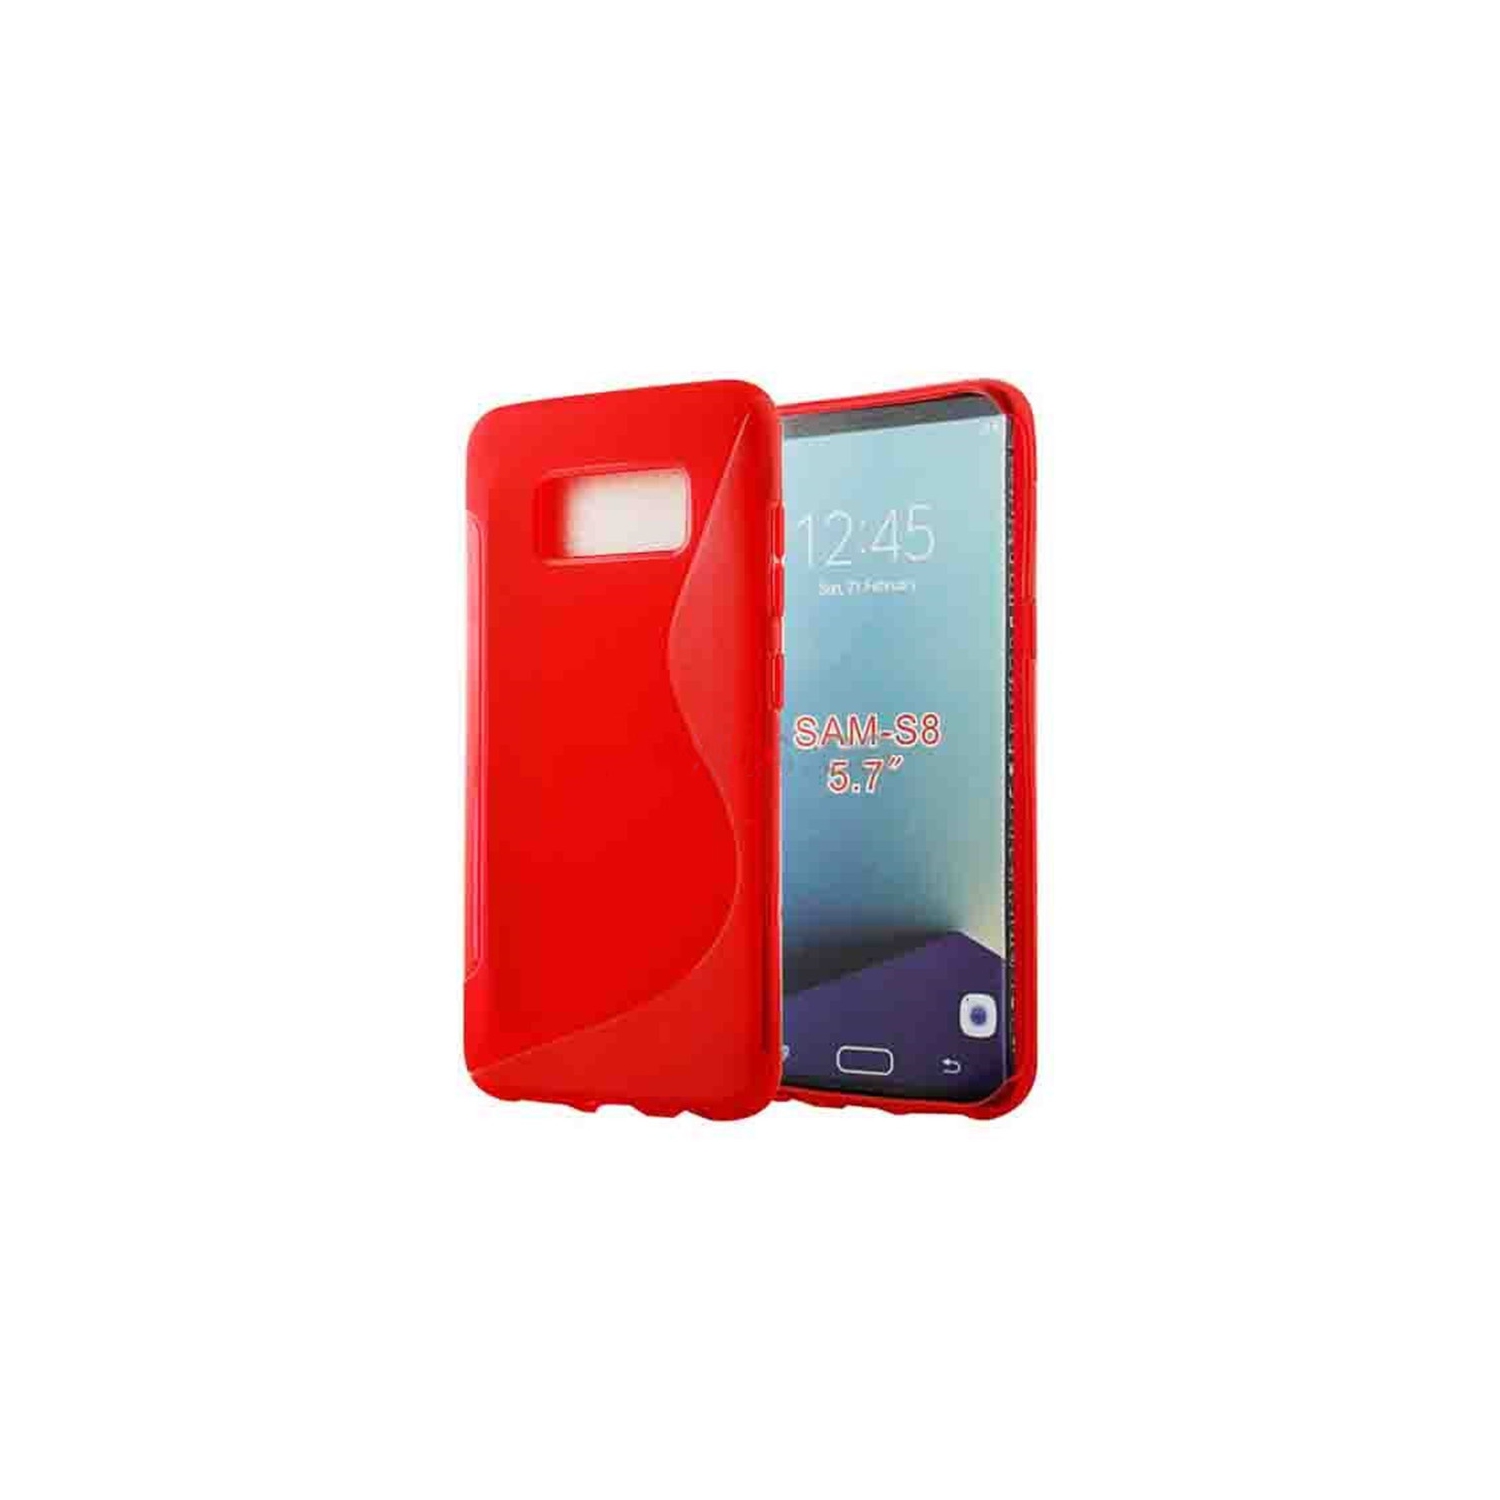 【CSmart】 Ultra Thin Soft TPU Silicone Jelly Bumper Back Cover Case for Samsung Galaxy S8, Red